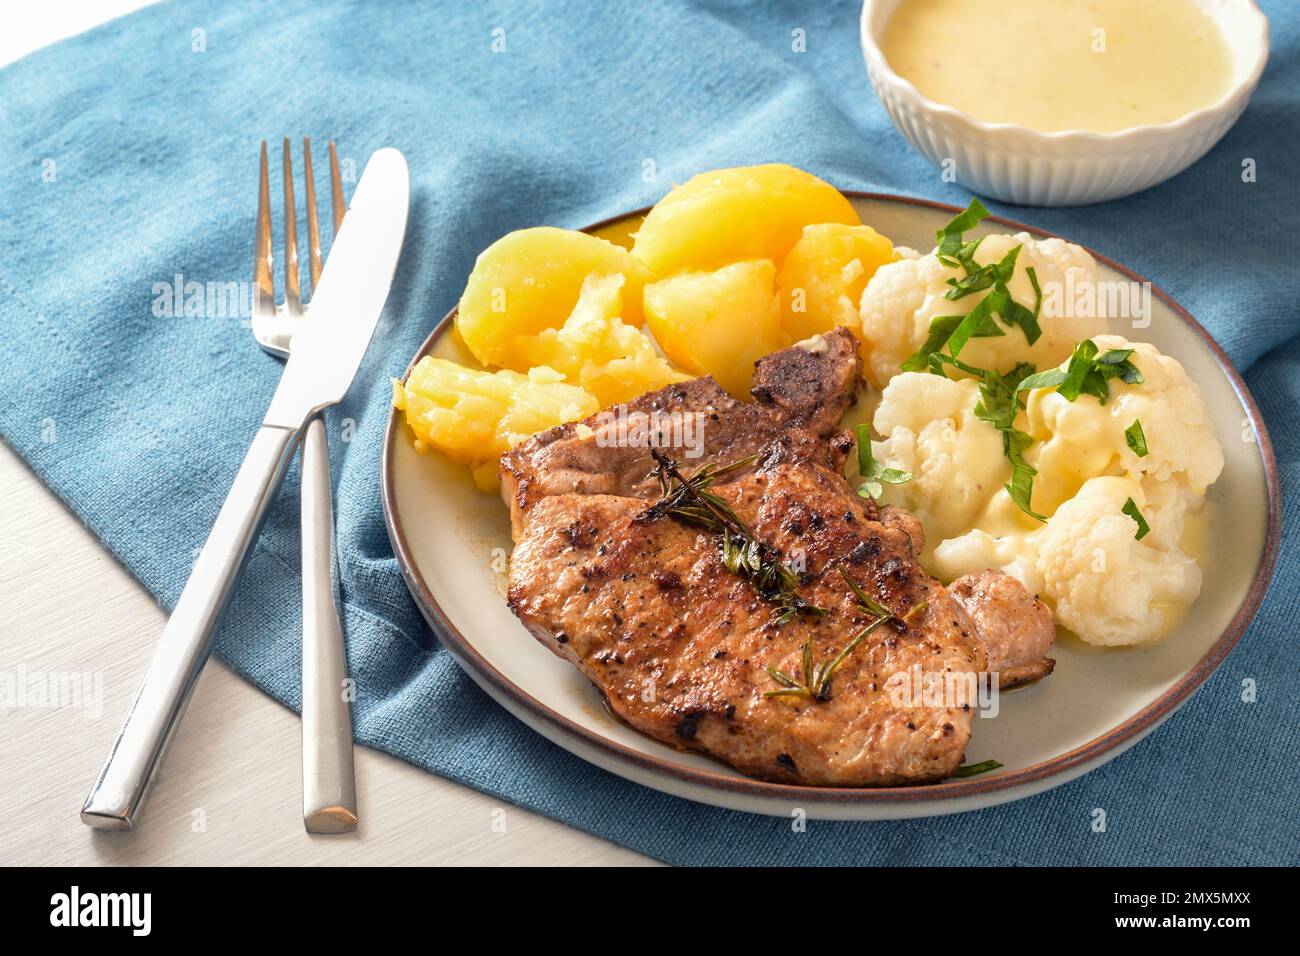 Dish with pork chop, cauliflower, potatoes and hollandaise sauce served with herb garnish on a plate and a blue napkin, selected focus, narrow depth o Stock Photo